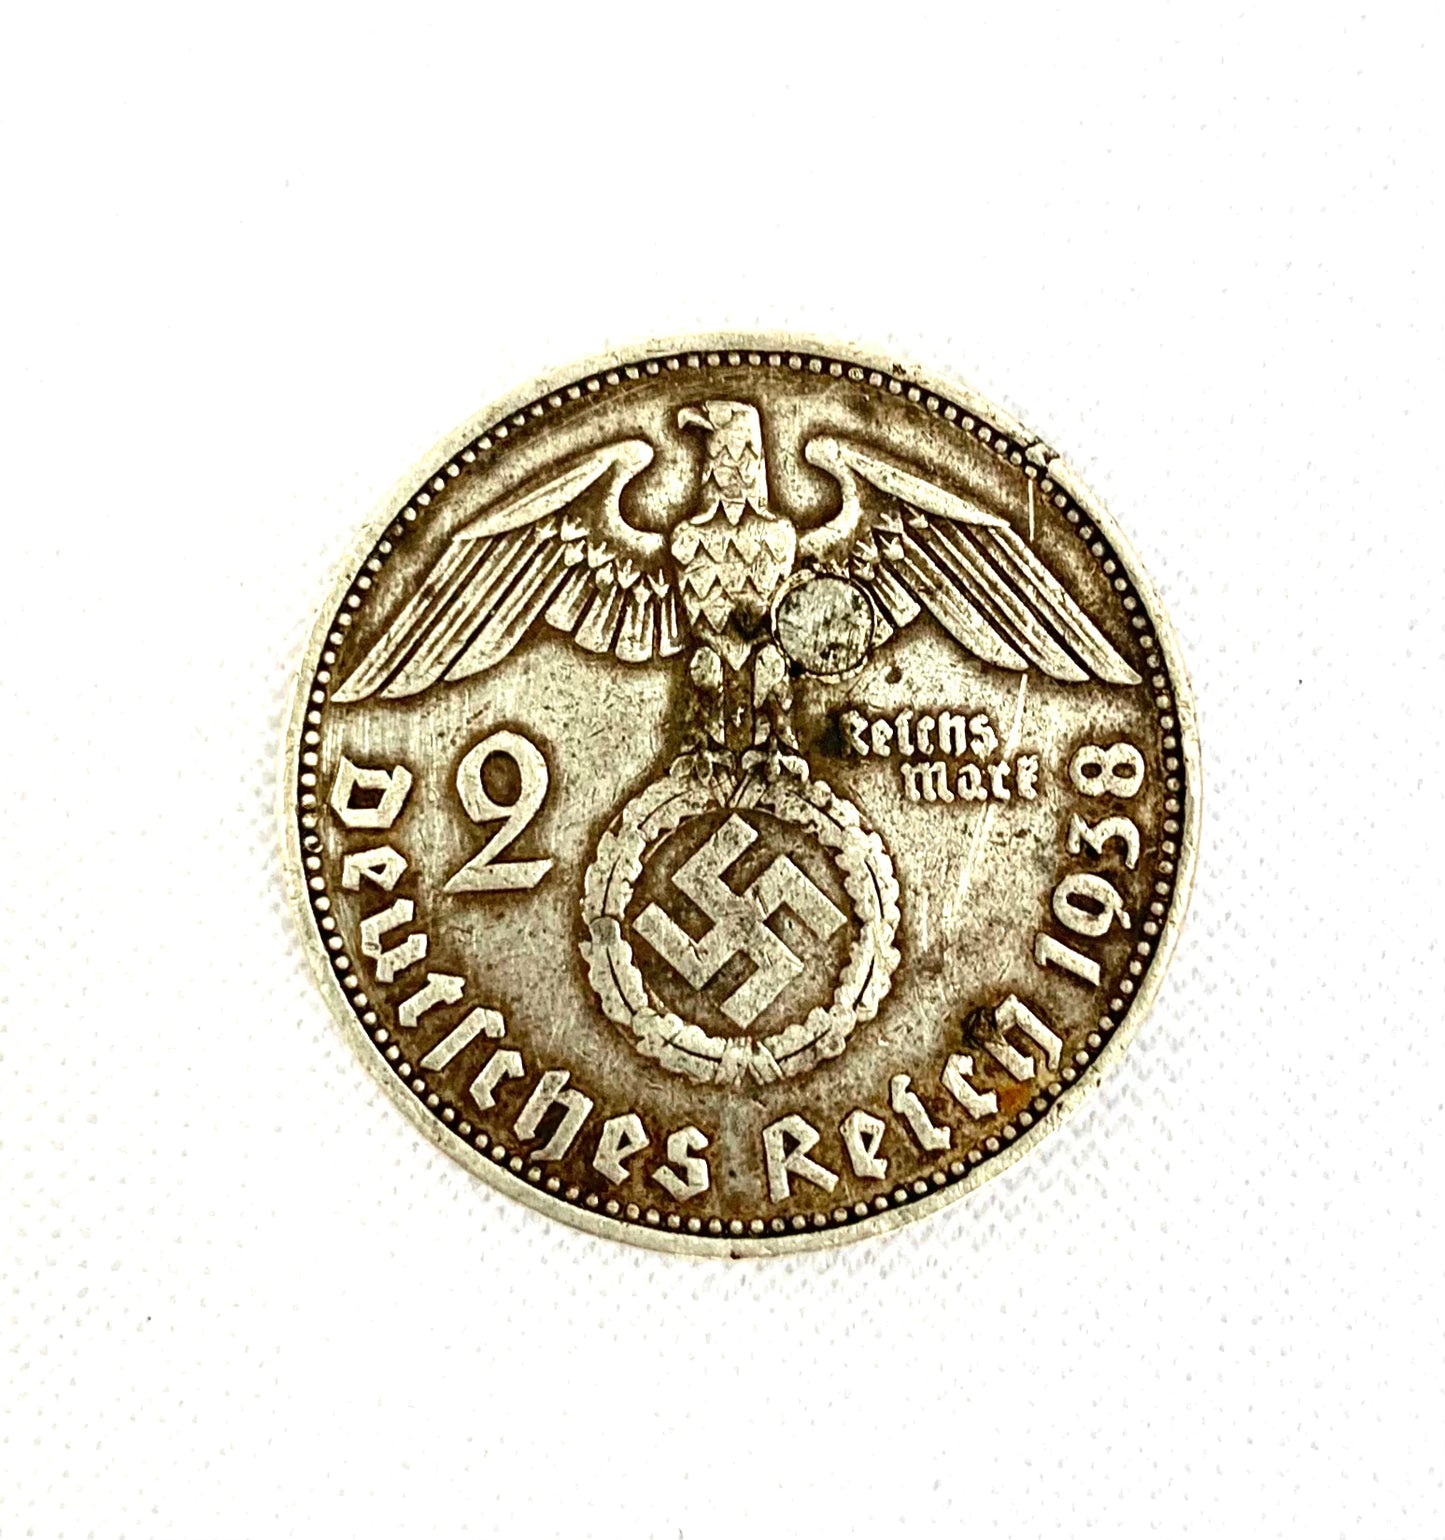 WW2 SOE German 2 Reichsmark Coin with Concealed Blade.